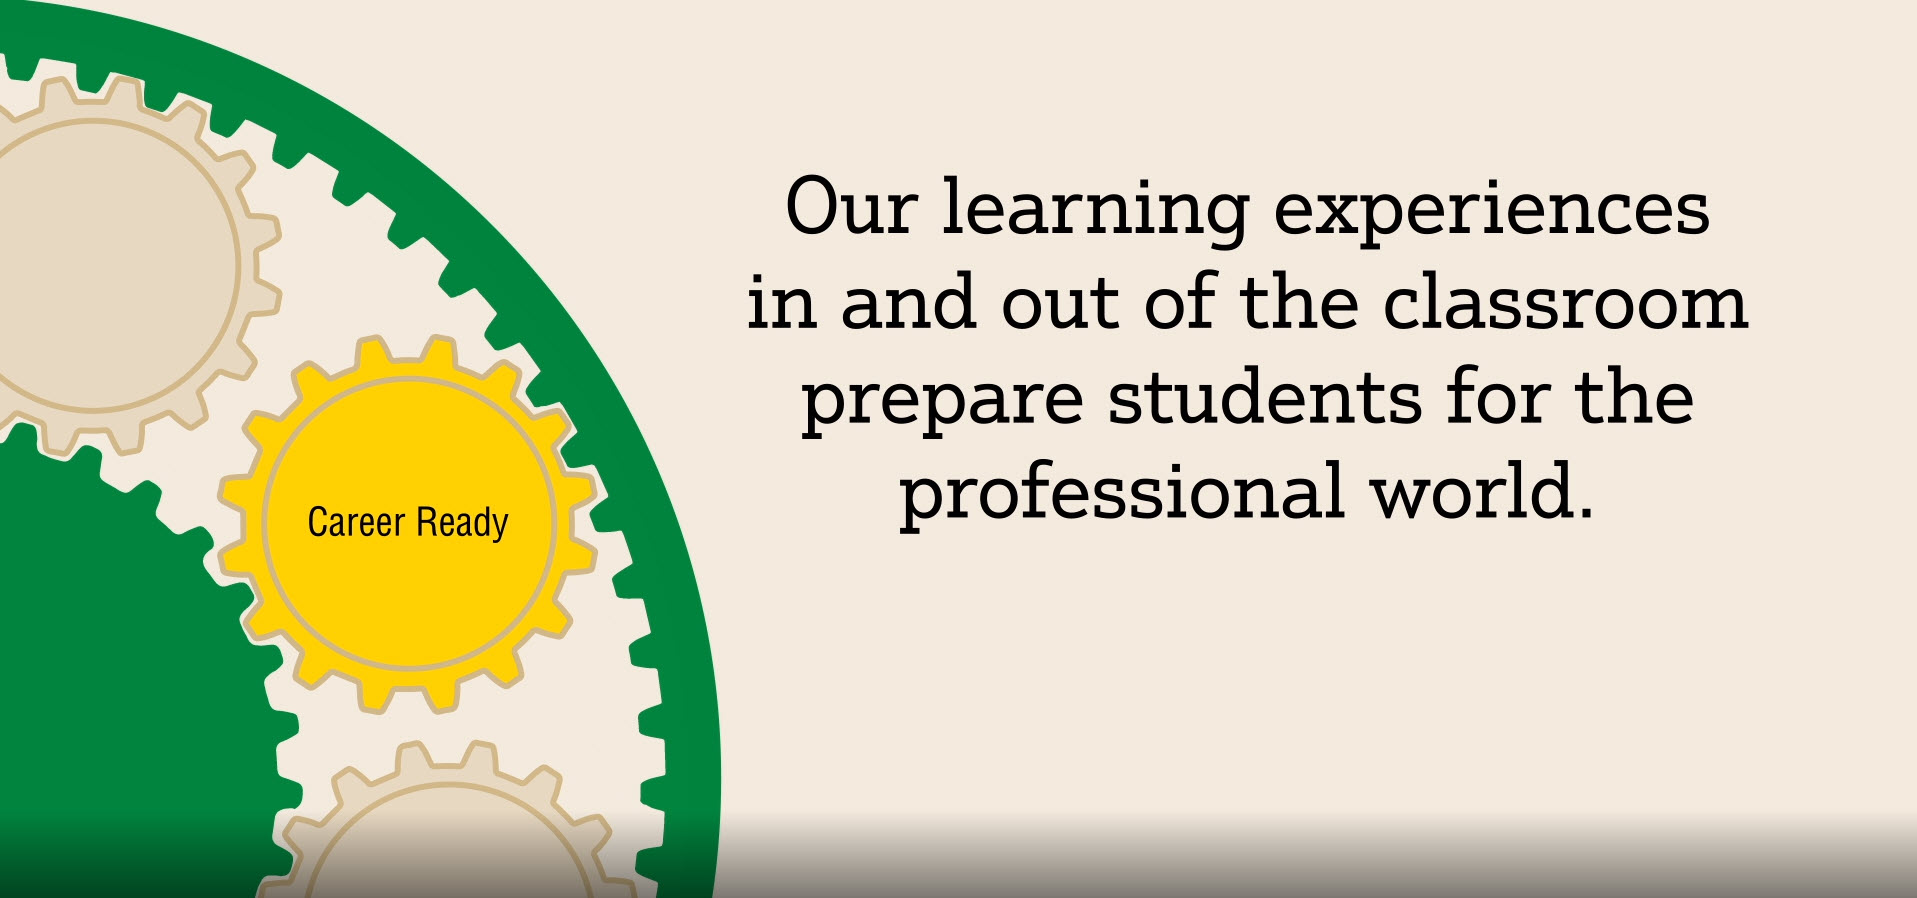 Our learning experiences in and out of the classroom prepare students for the professional world.